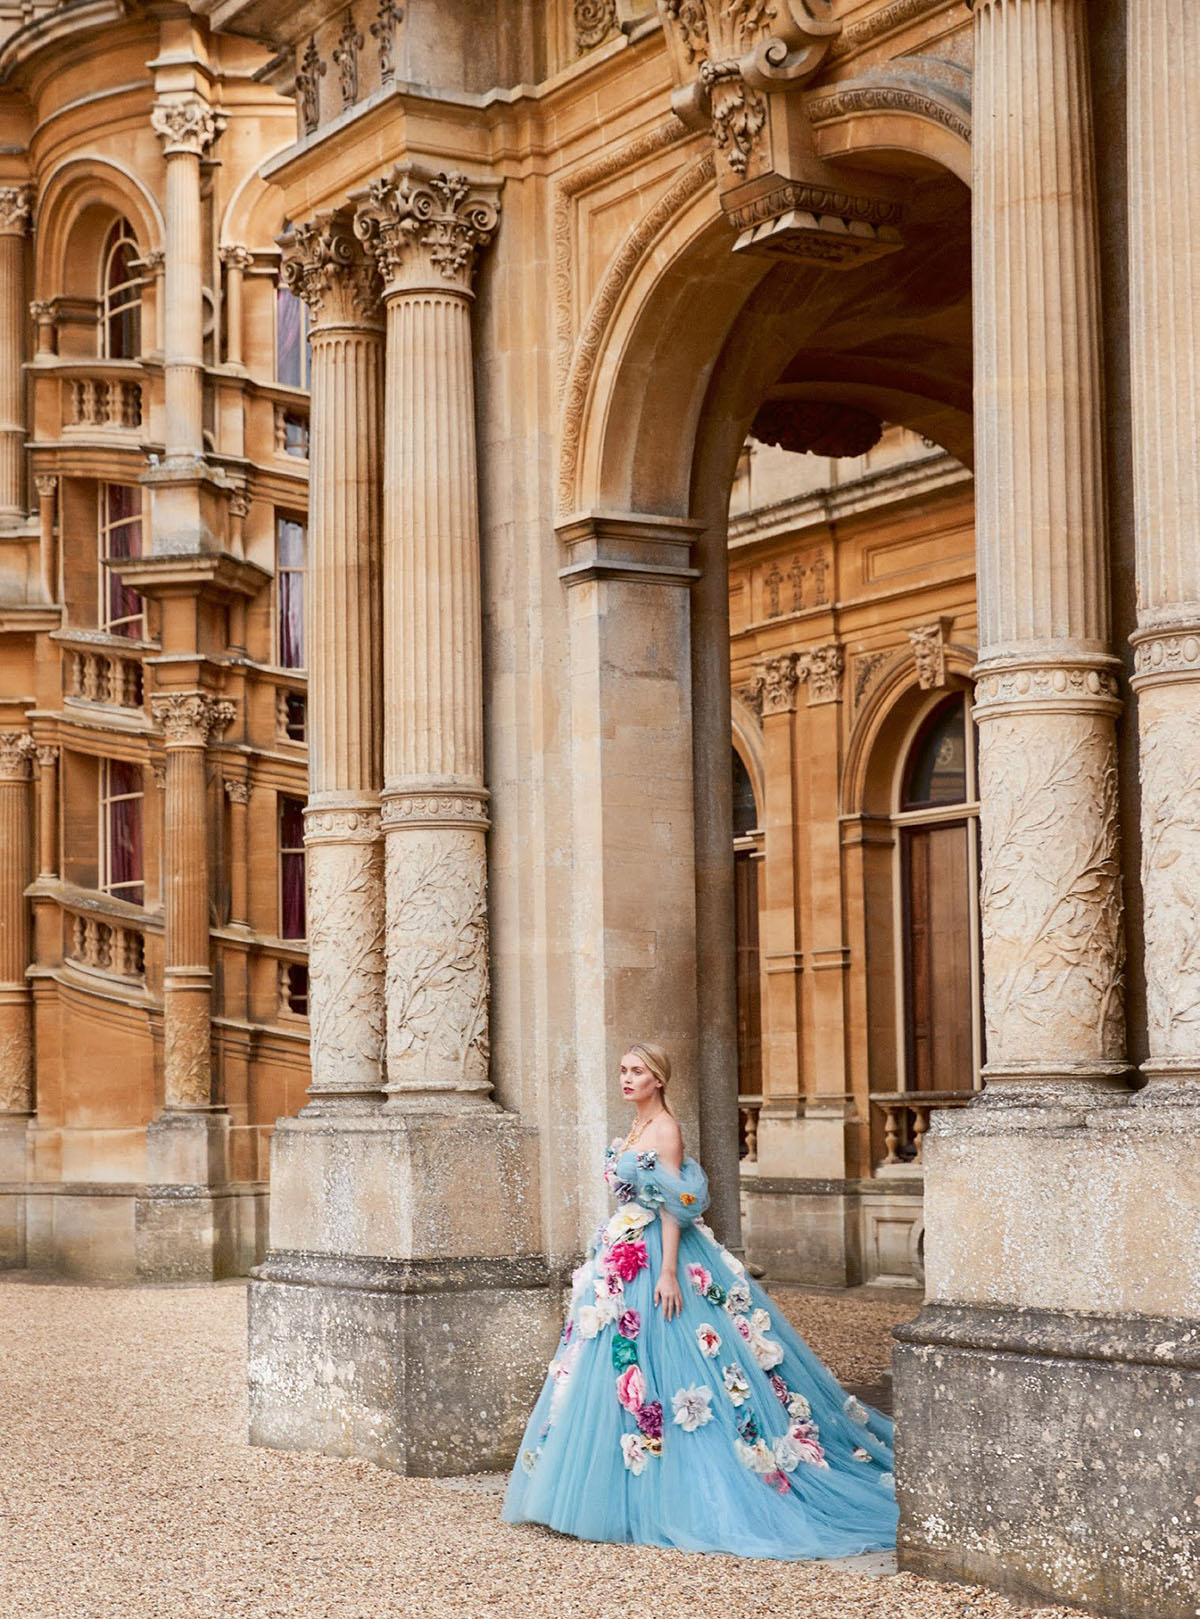 Lady Kitty Spencer covers Town & Country UK Summer 2021 by Richard Phibbs